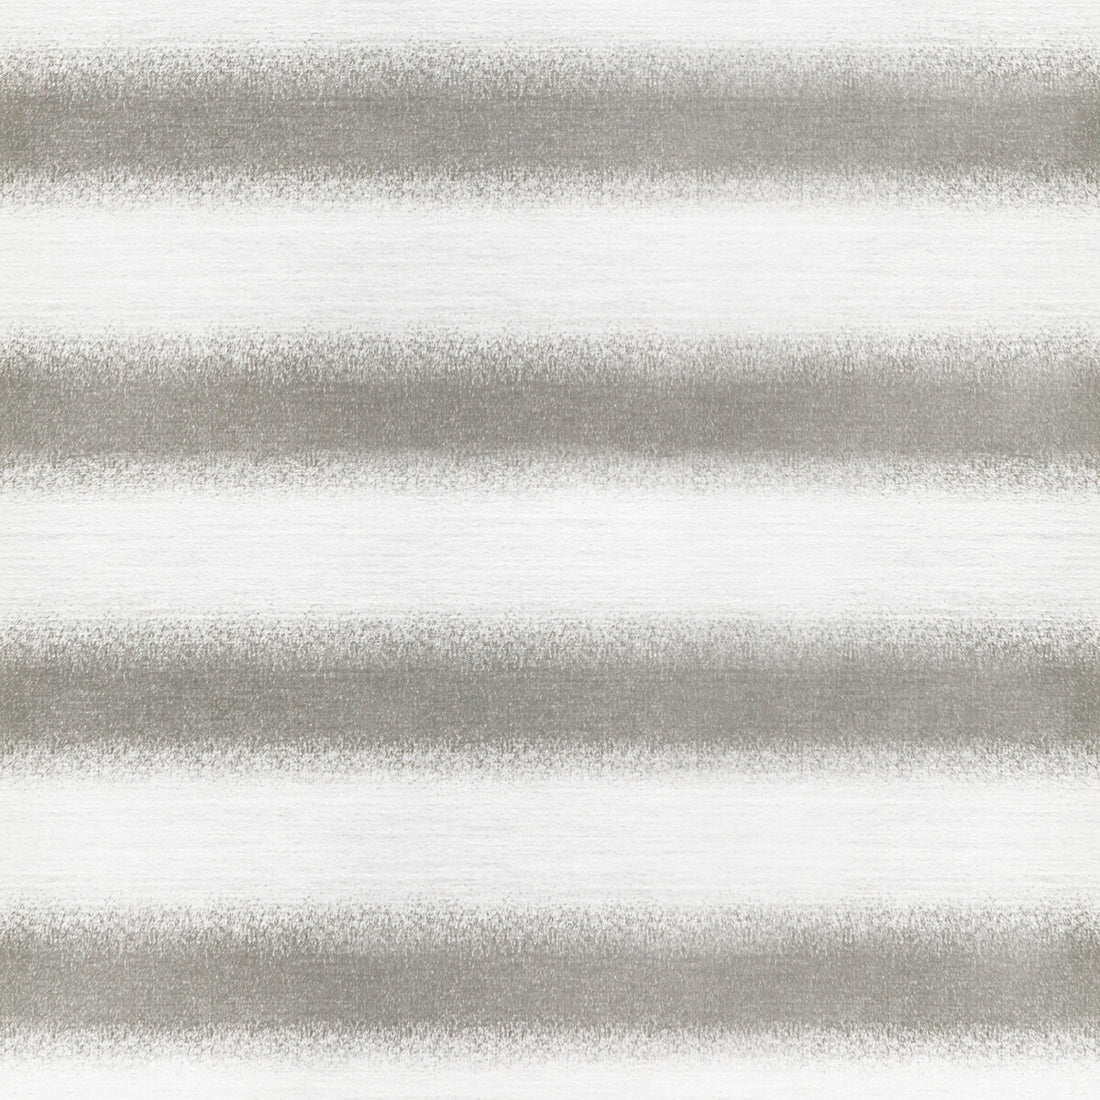 Foggy Point fabric in pewter color - pattern 4953.11.0 - by Kravet Couture in the Modern Luxe Silk Luster collection